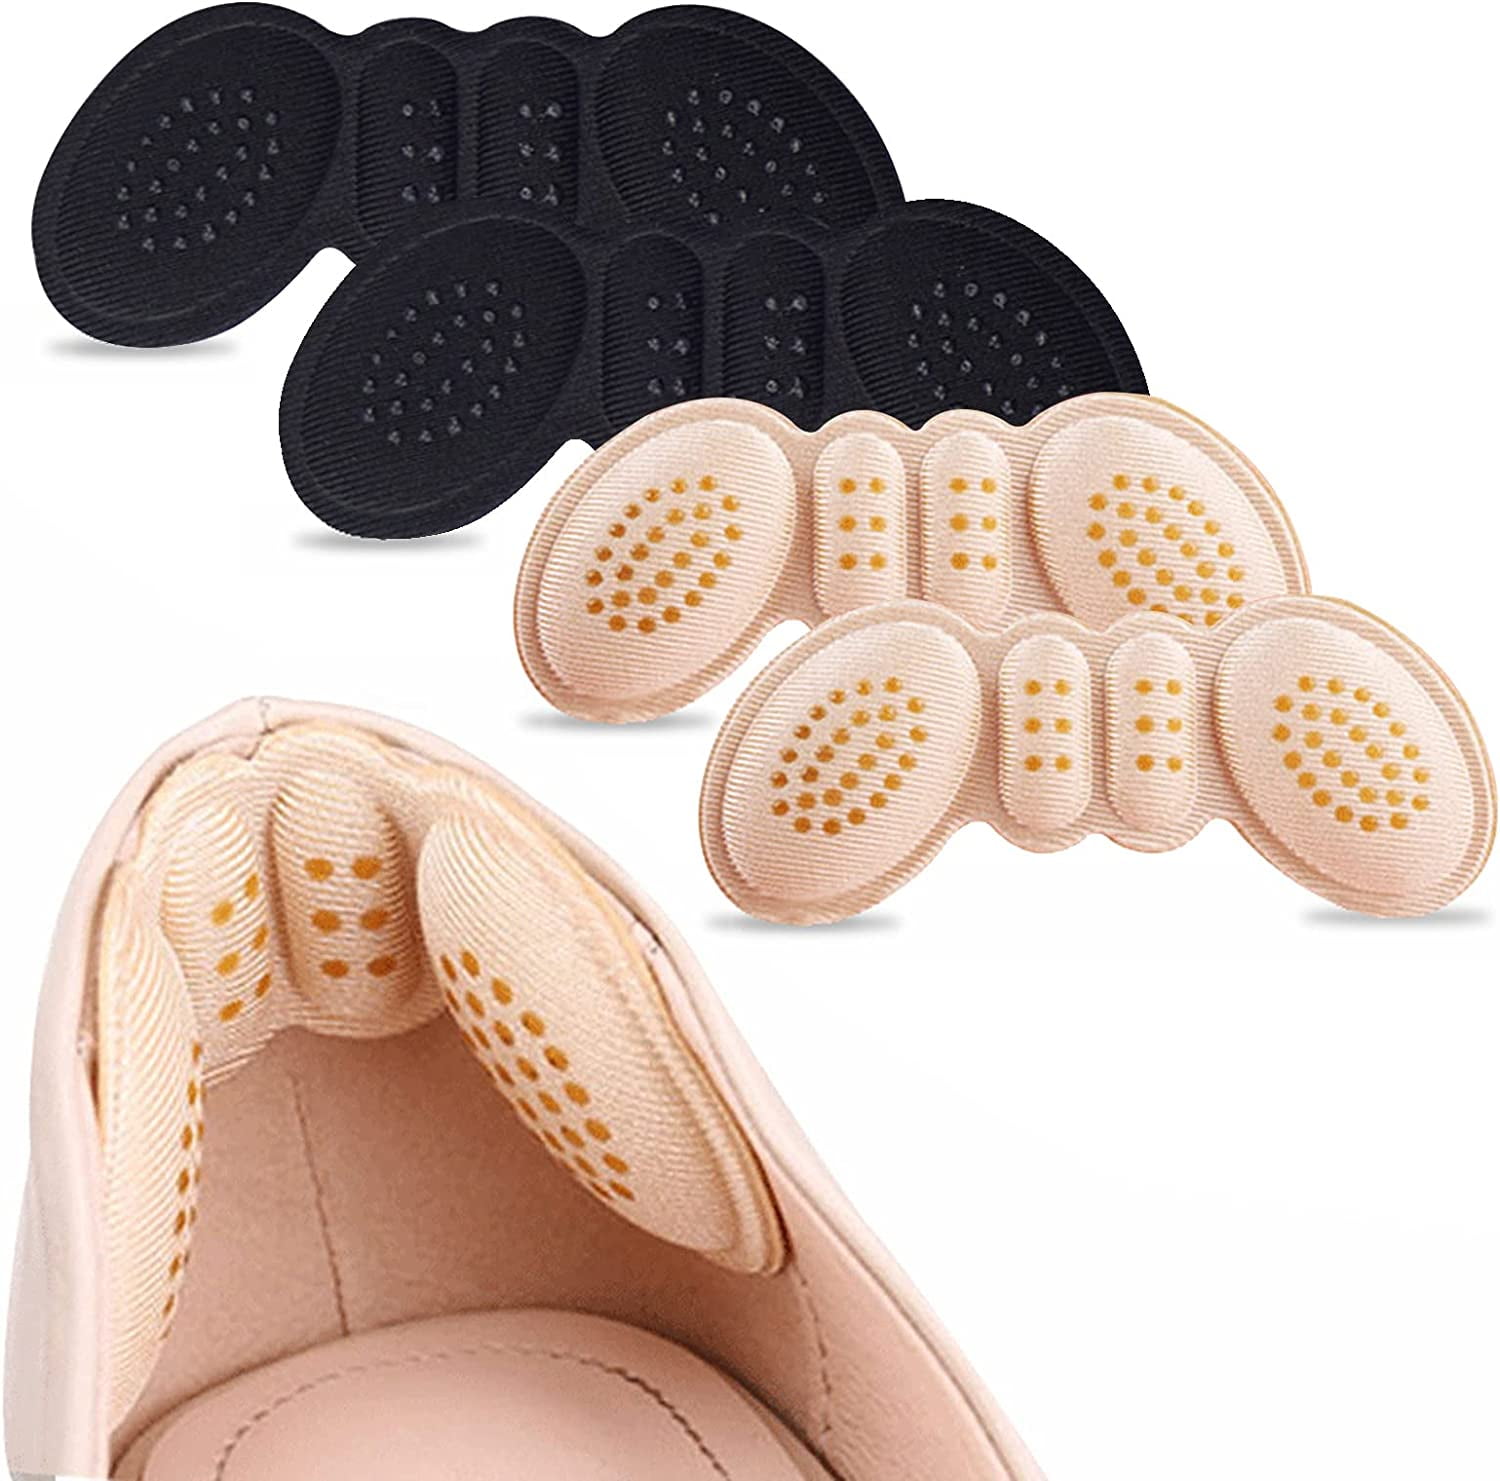 Adhesive Back of Heel Cushion Pads, Heel Grips Inserts for Loose Shoes, Too  Big Boots, Reusable Heel Guards Liners for Women Men, Improve Shoe Fit,  6PCS-Black - Walmart.com